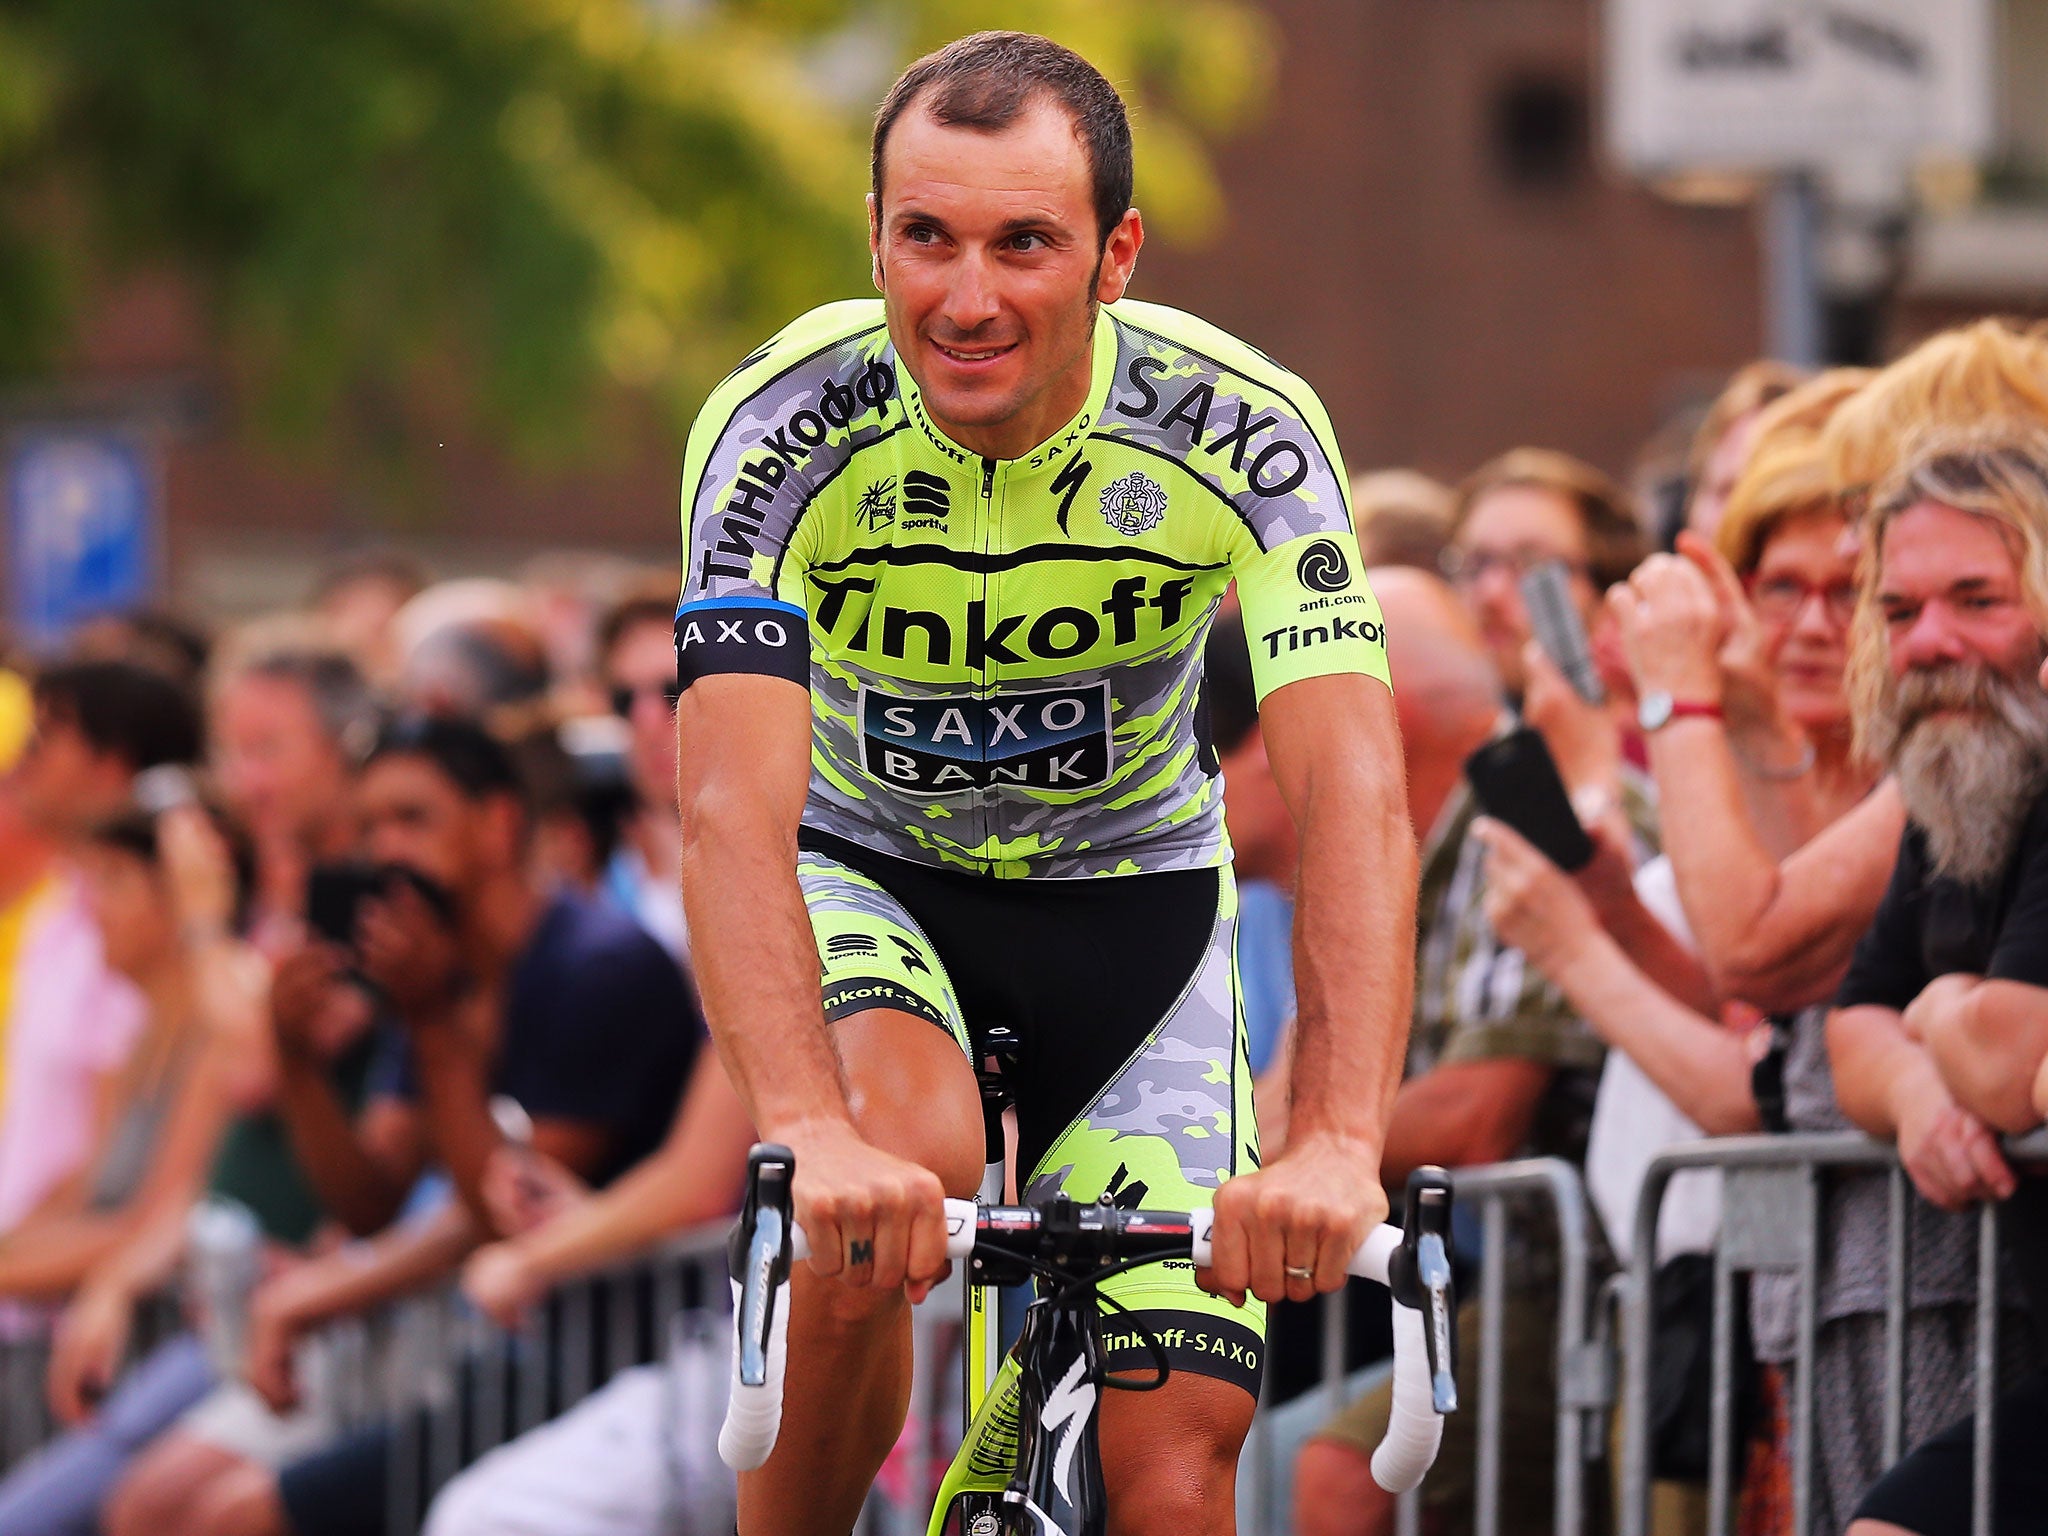 Ivan Basso has withdrawn from the Tour de France after being diagnosed with testicular cancer